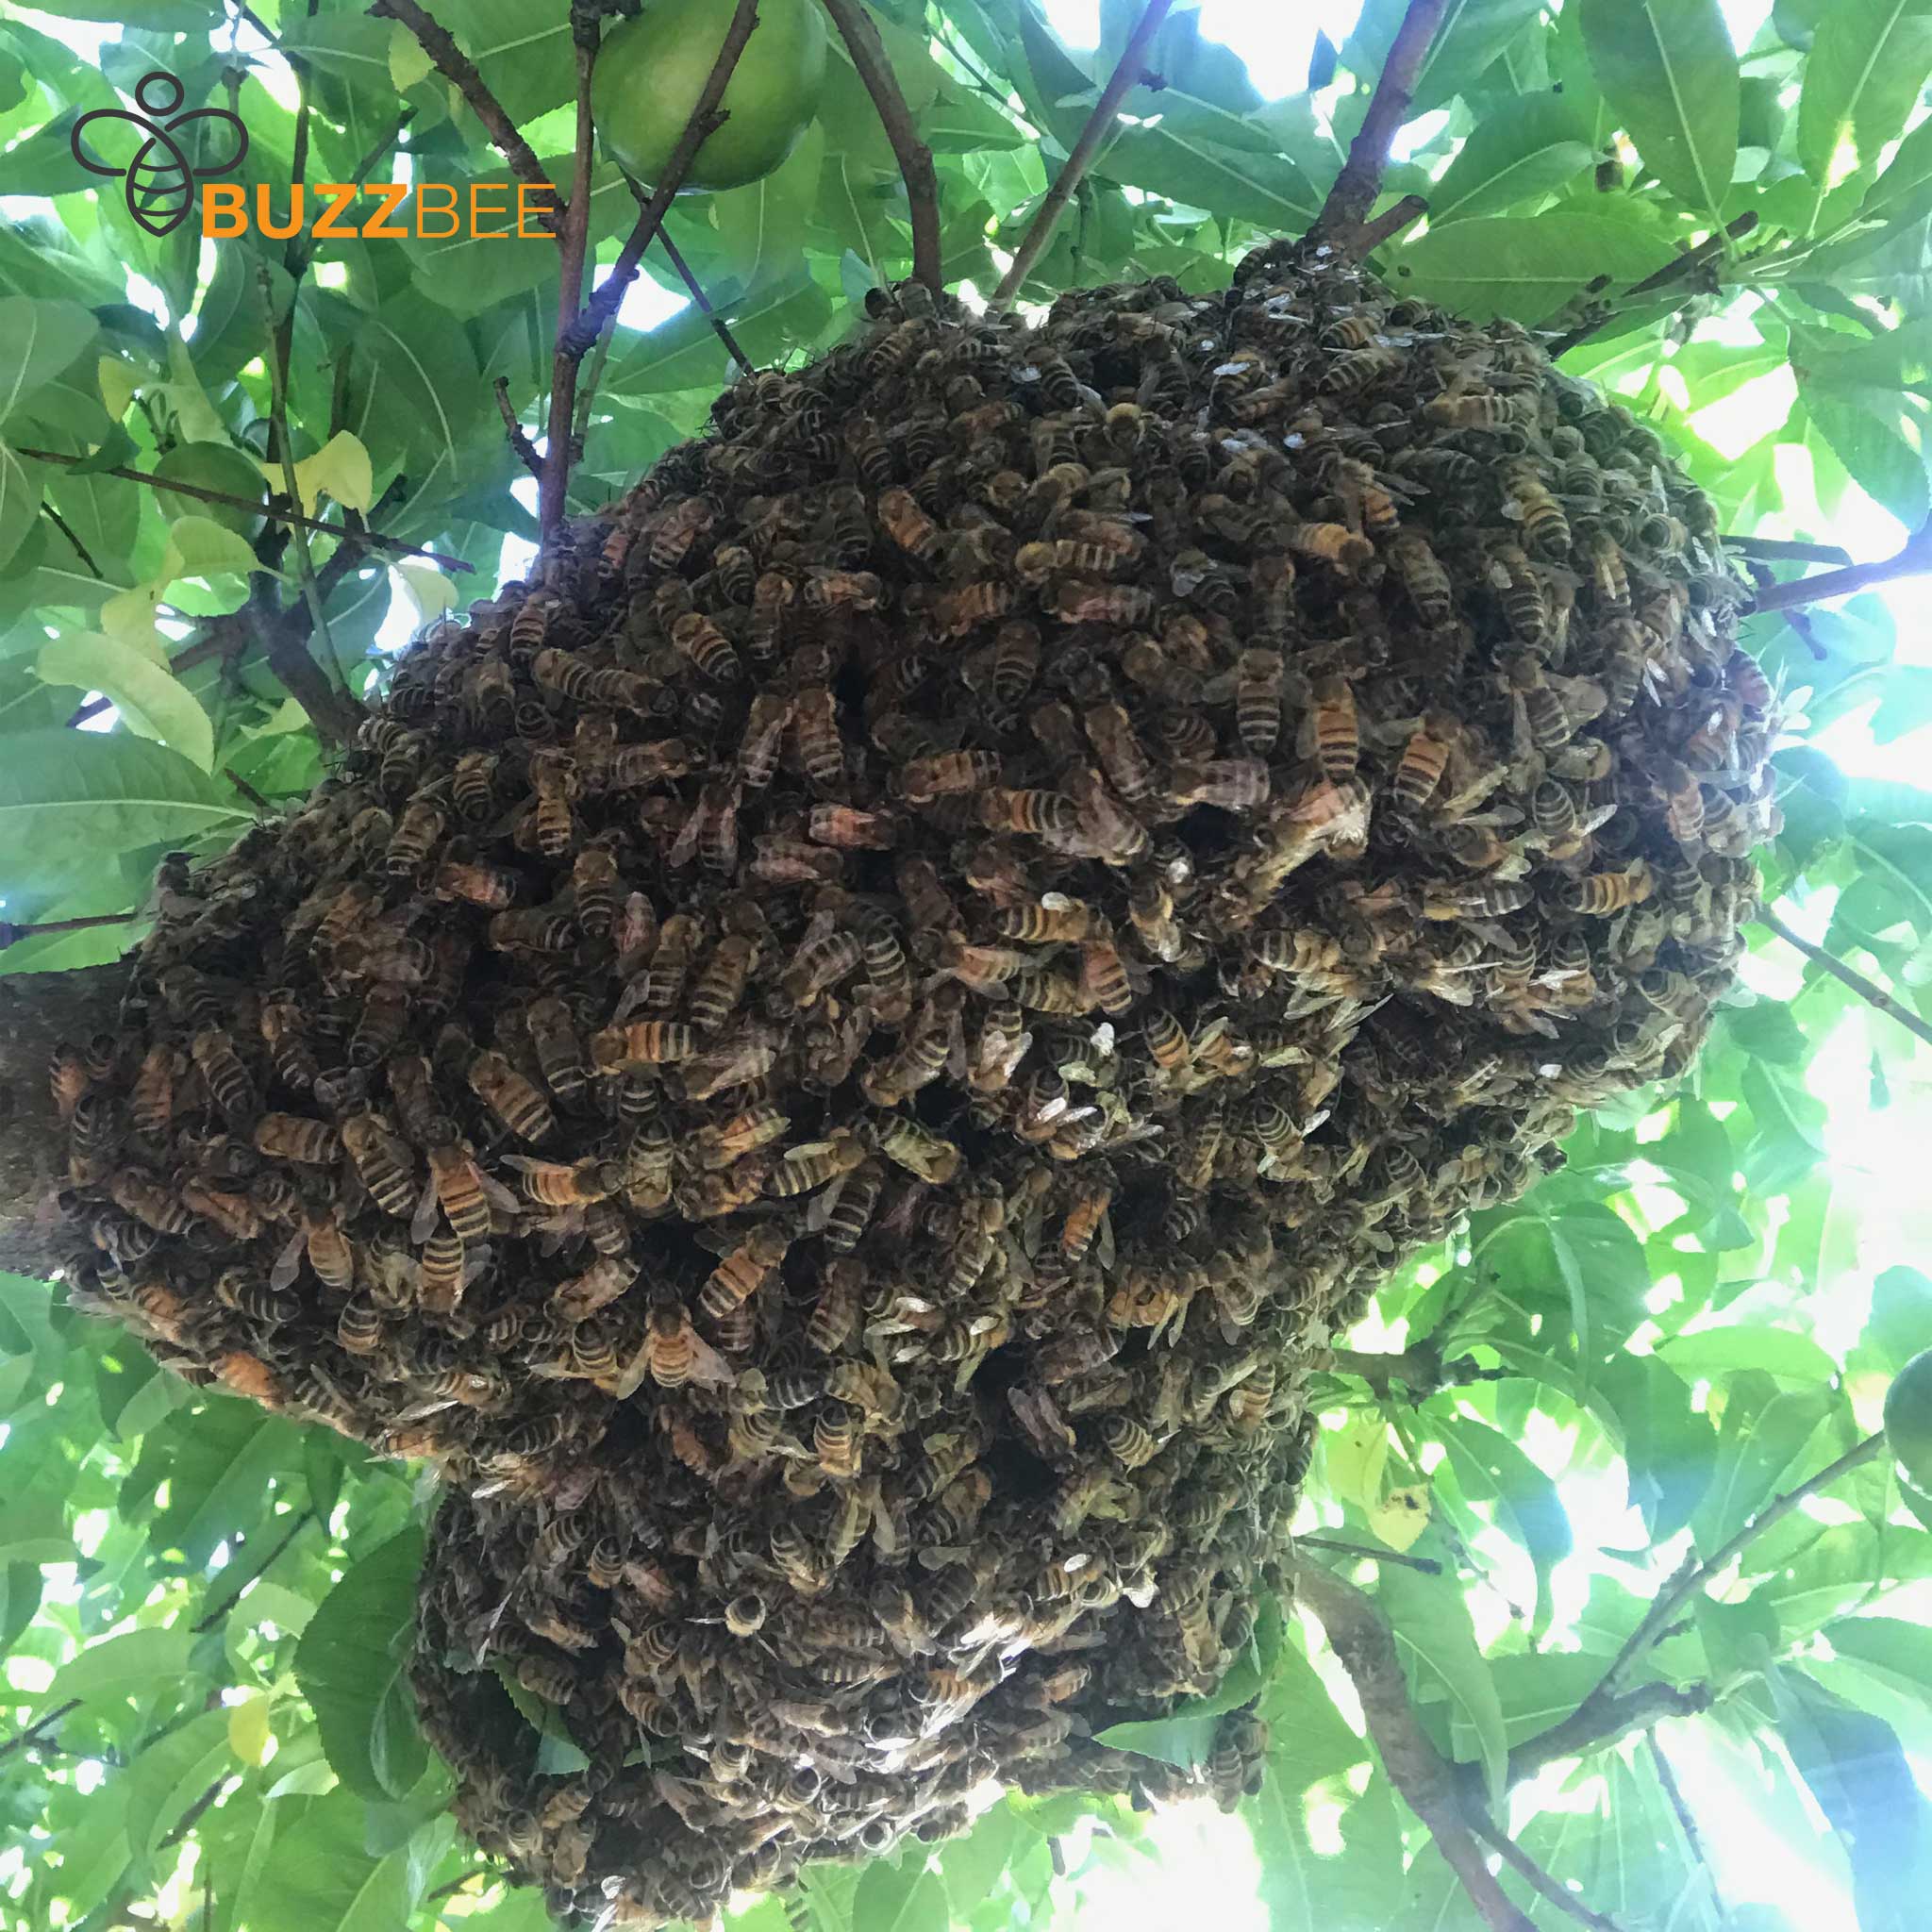 Bee Removal Service - Bee Service collection by Buzzbee Beekeeping Supplies